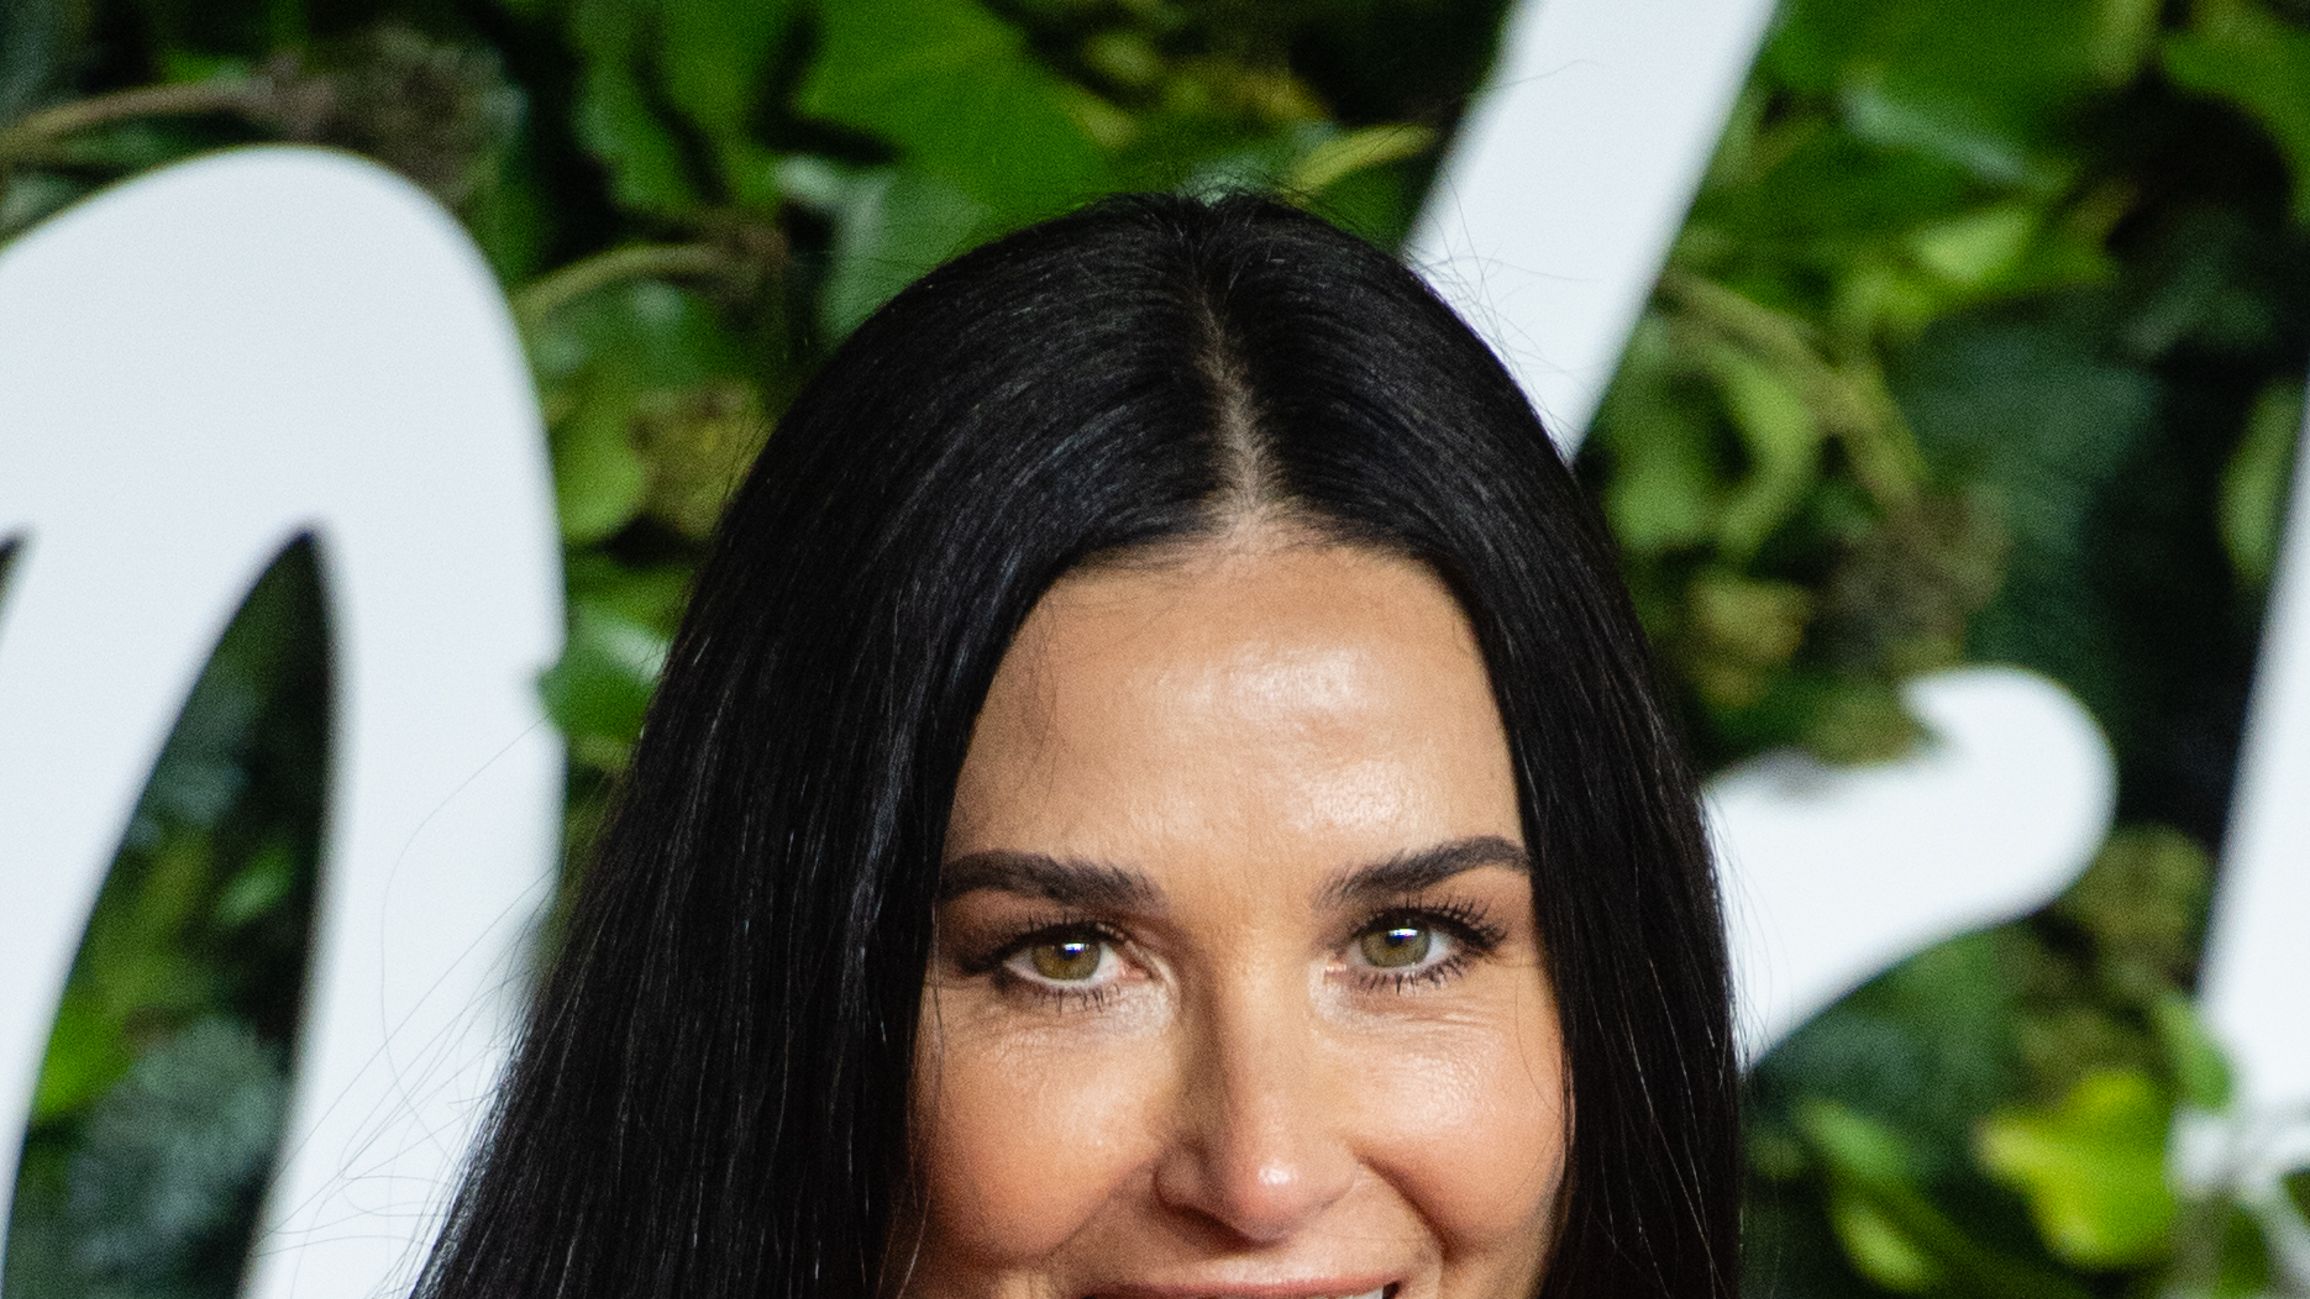 60year Woman 20yearboy Sex - Demi Moore Is Excited to Turn 60: 'I Feel More Alive and Present'